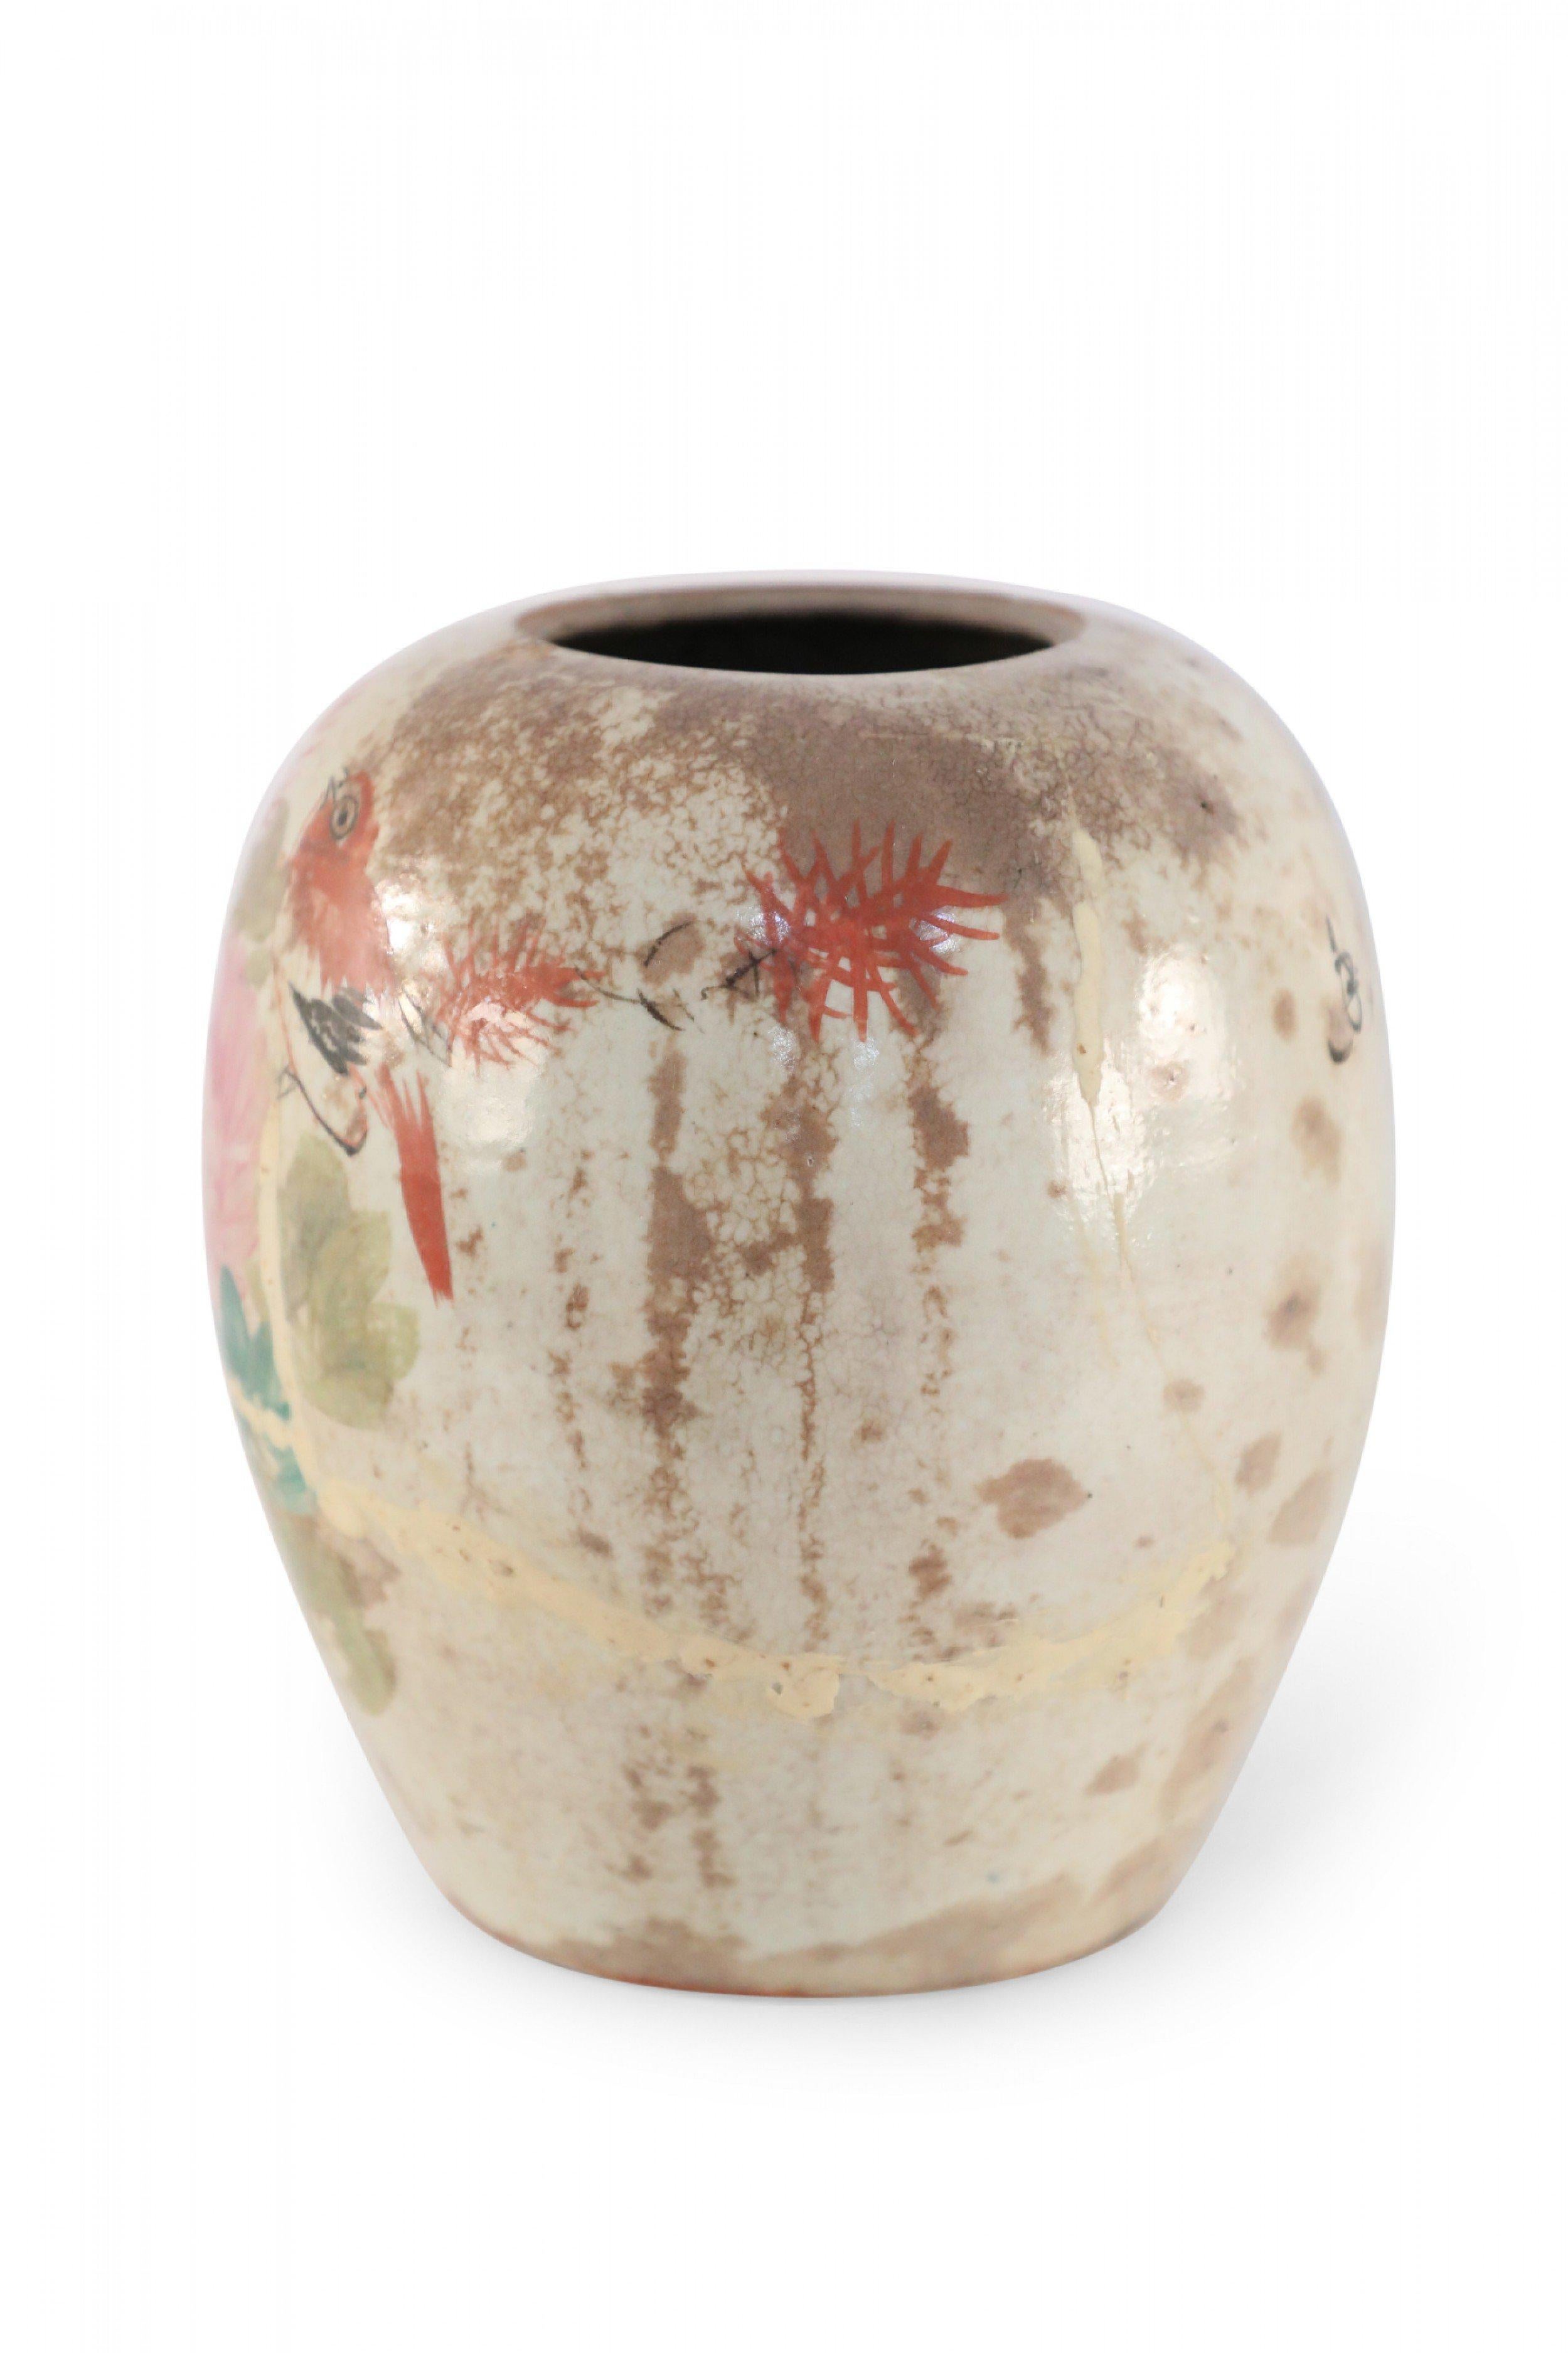 Antique Chinese (Early 20th century) bulbous porcelain vase with pink florals and an orange bird amid green leaves on one side and characters on the reverse. There is dark, speckled crazing on the glaze.
   